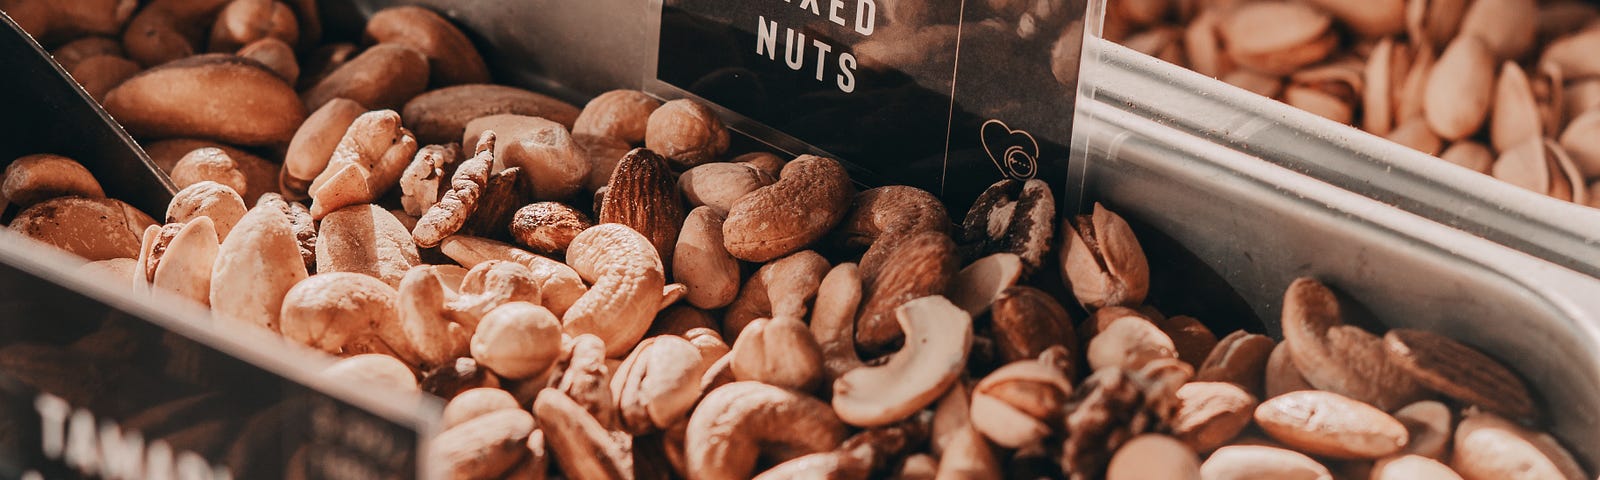 A variety of nuts!